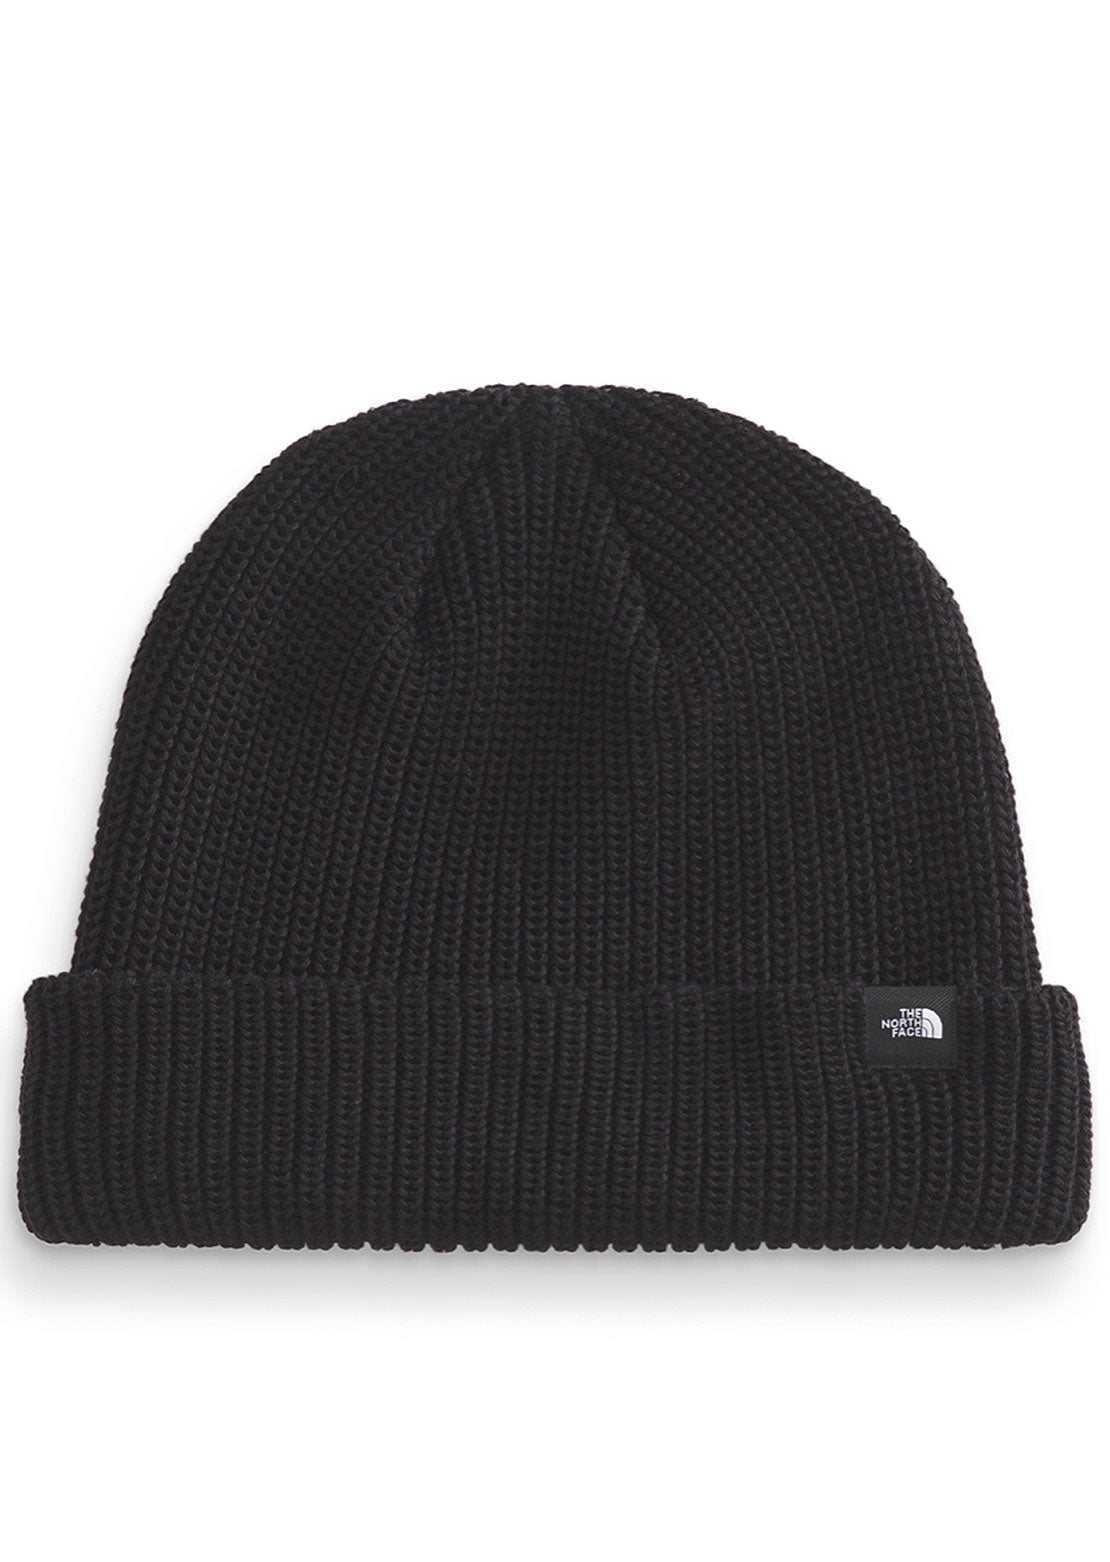 The North Face Fisherman Beanie Black